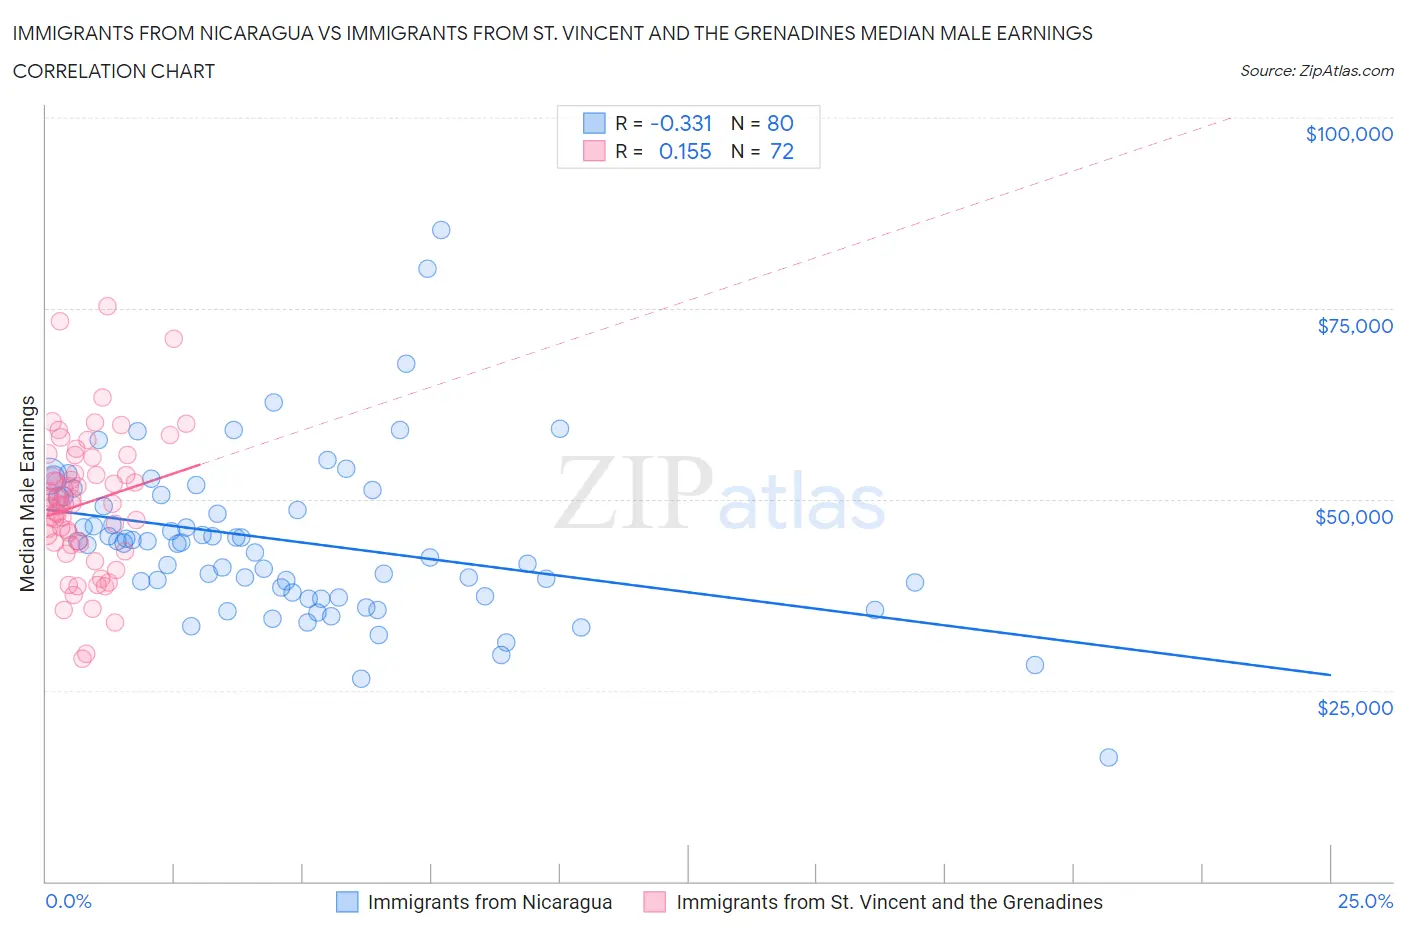 Immigrants from Nicaragua vs Immigrants from St. Vincent and the Grenadines Median Male Earnings